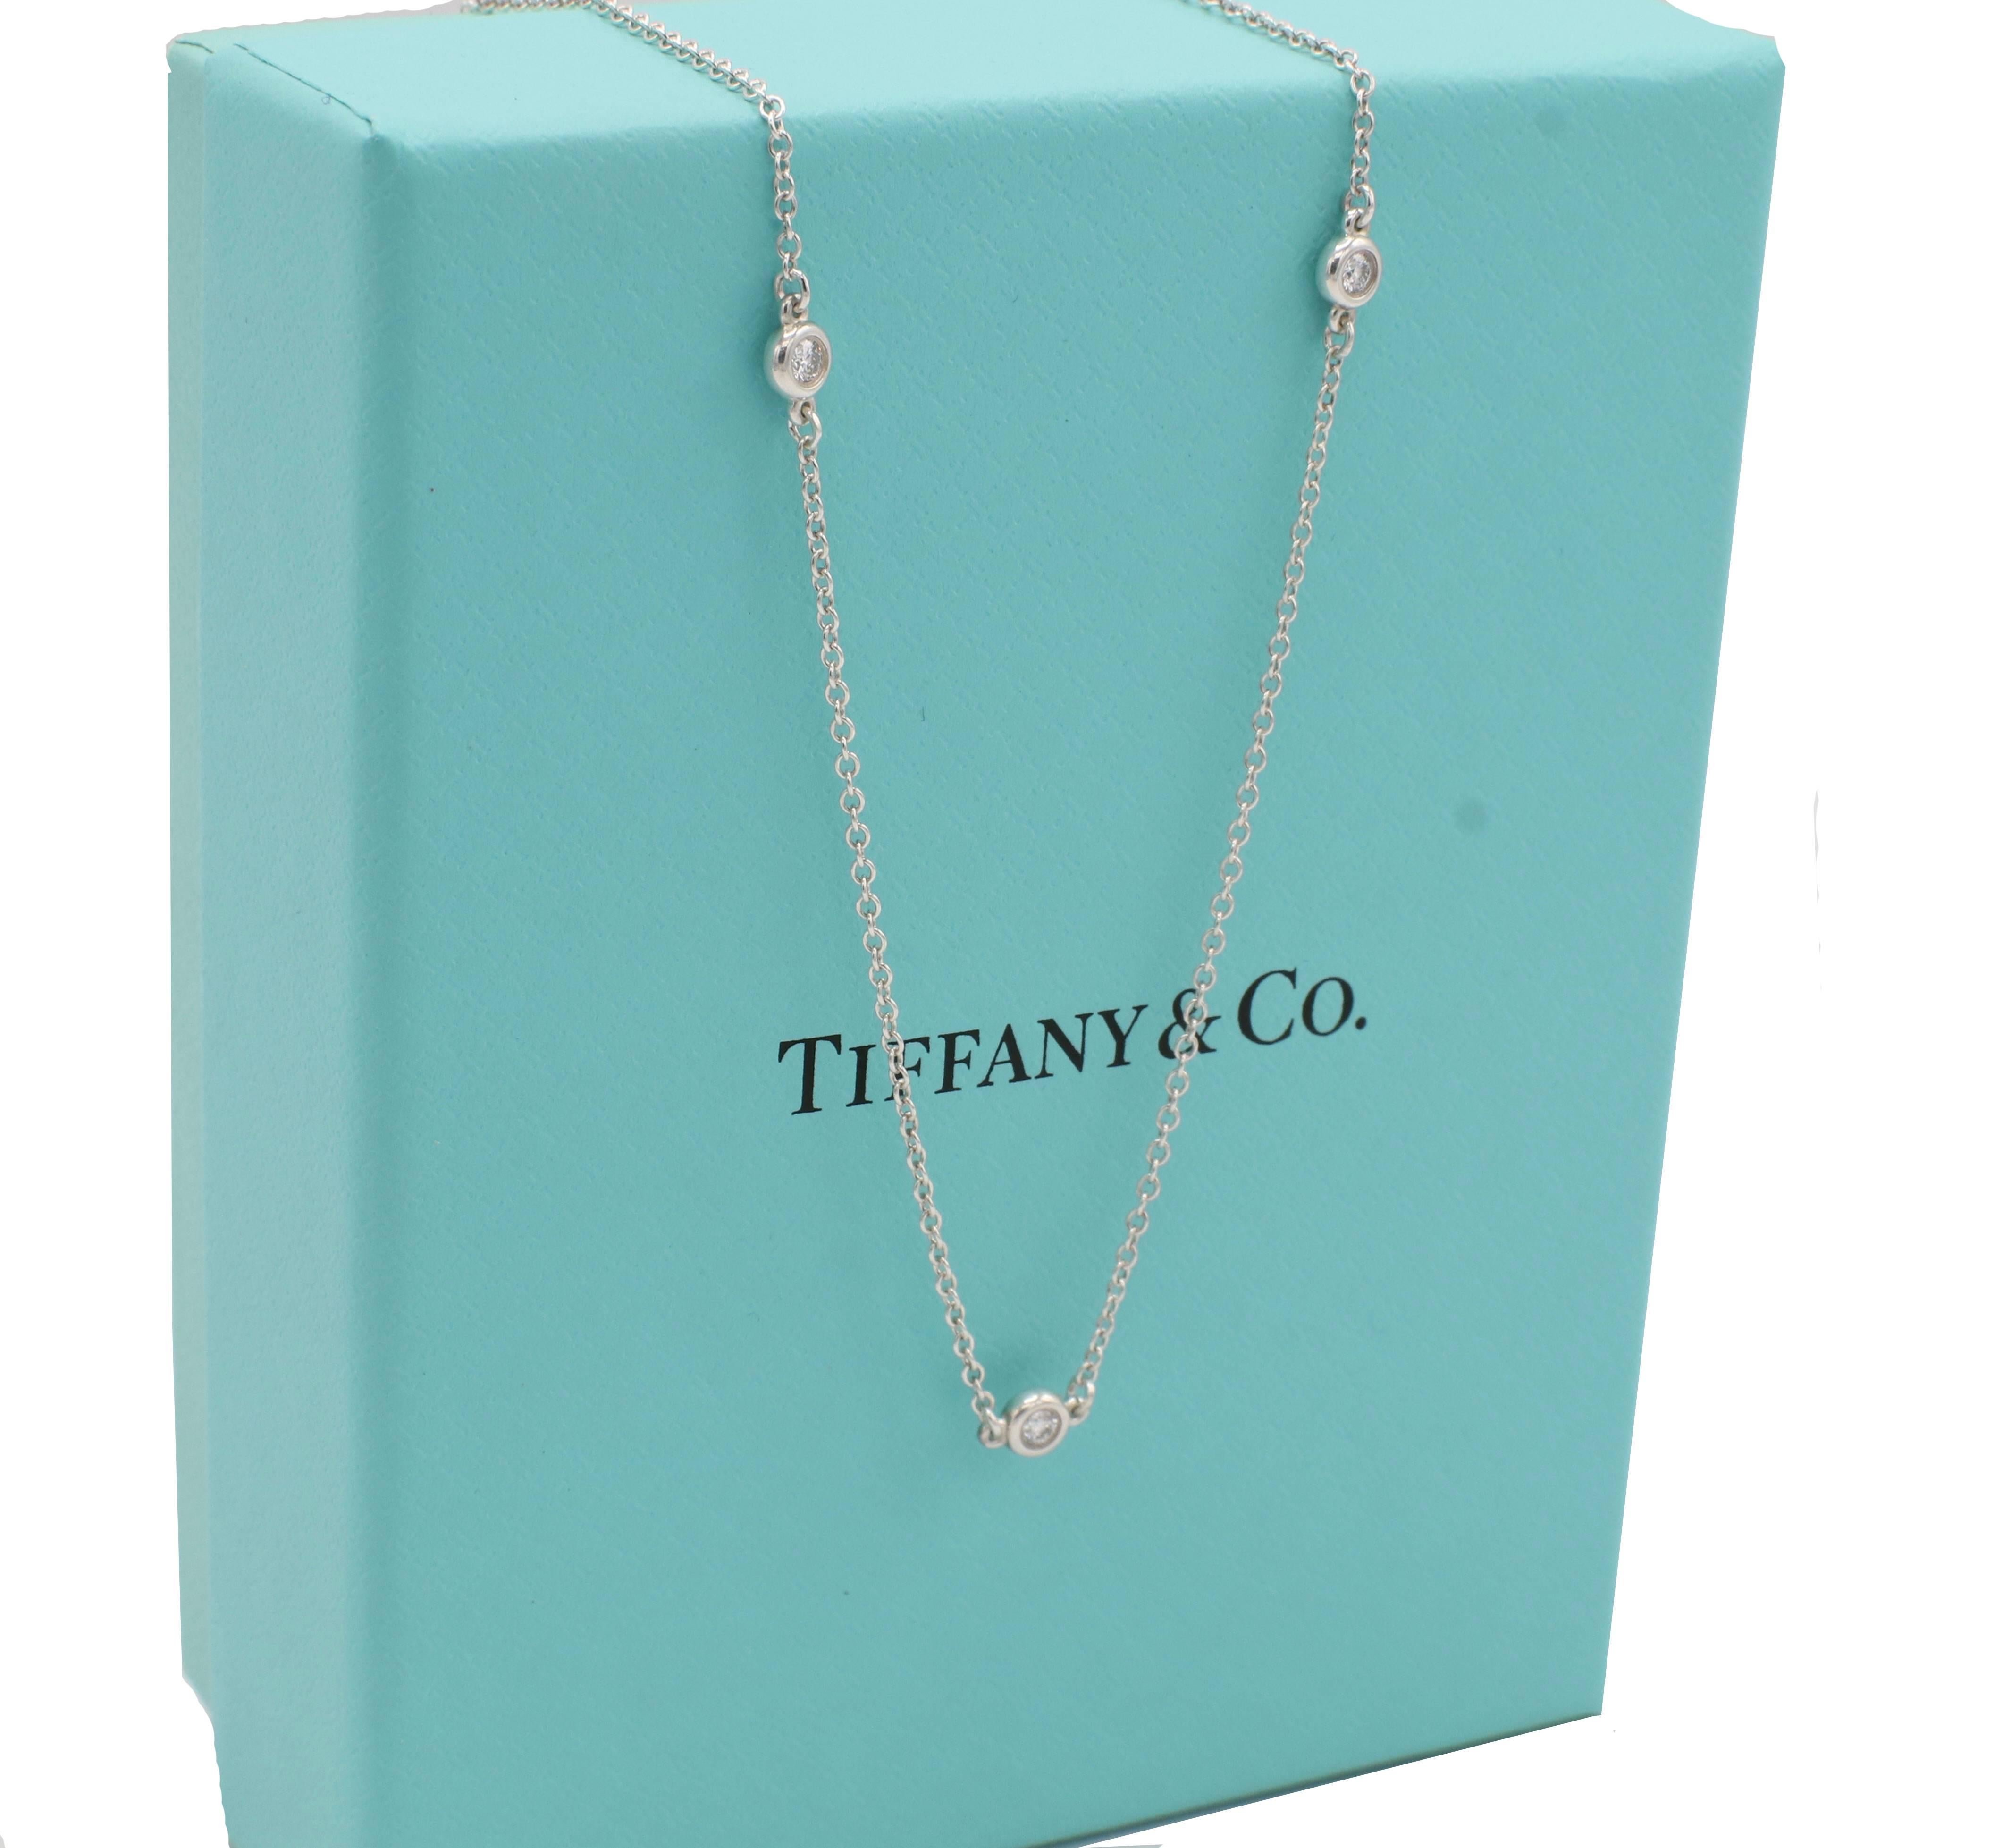 Tiffany & Co. Elsa Peretti Sterling Silver Natural Diamond By The Yard Necklace 
Metal: Sterling silver 925
Weight: 1.63 grams
Diamonds: 0.09 CTW F-G VS round natural diamonds
Length: 16 inches
Signed: Tiffany & Co. 925 ©PERETTI SPAIN
Retail: $1,275